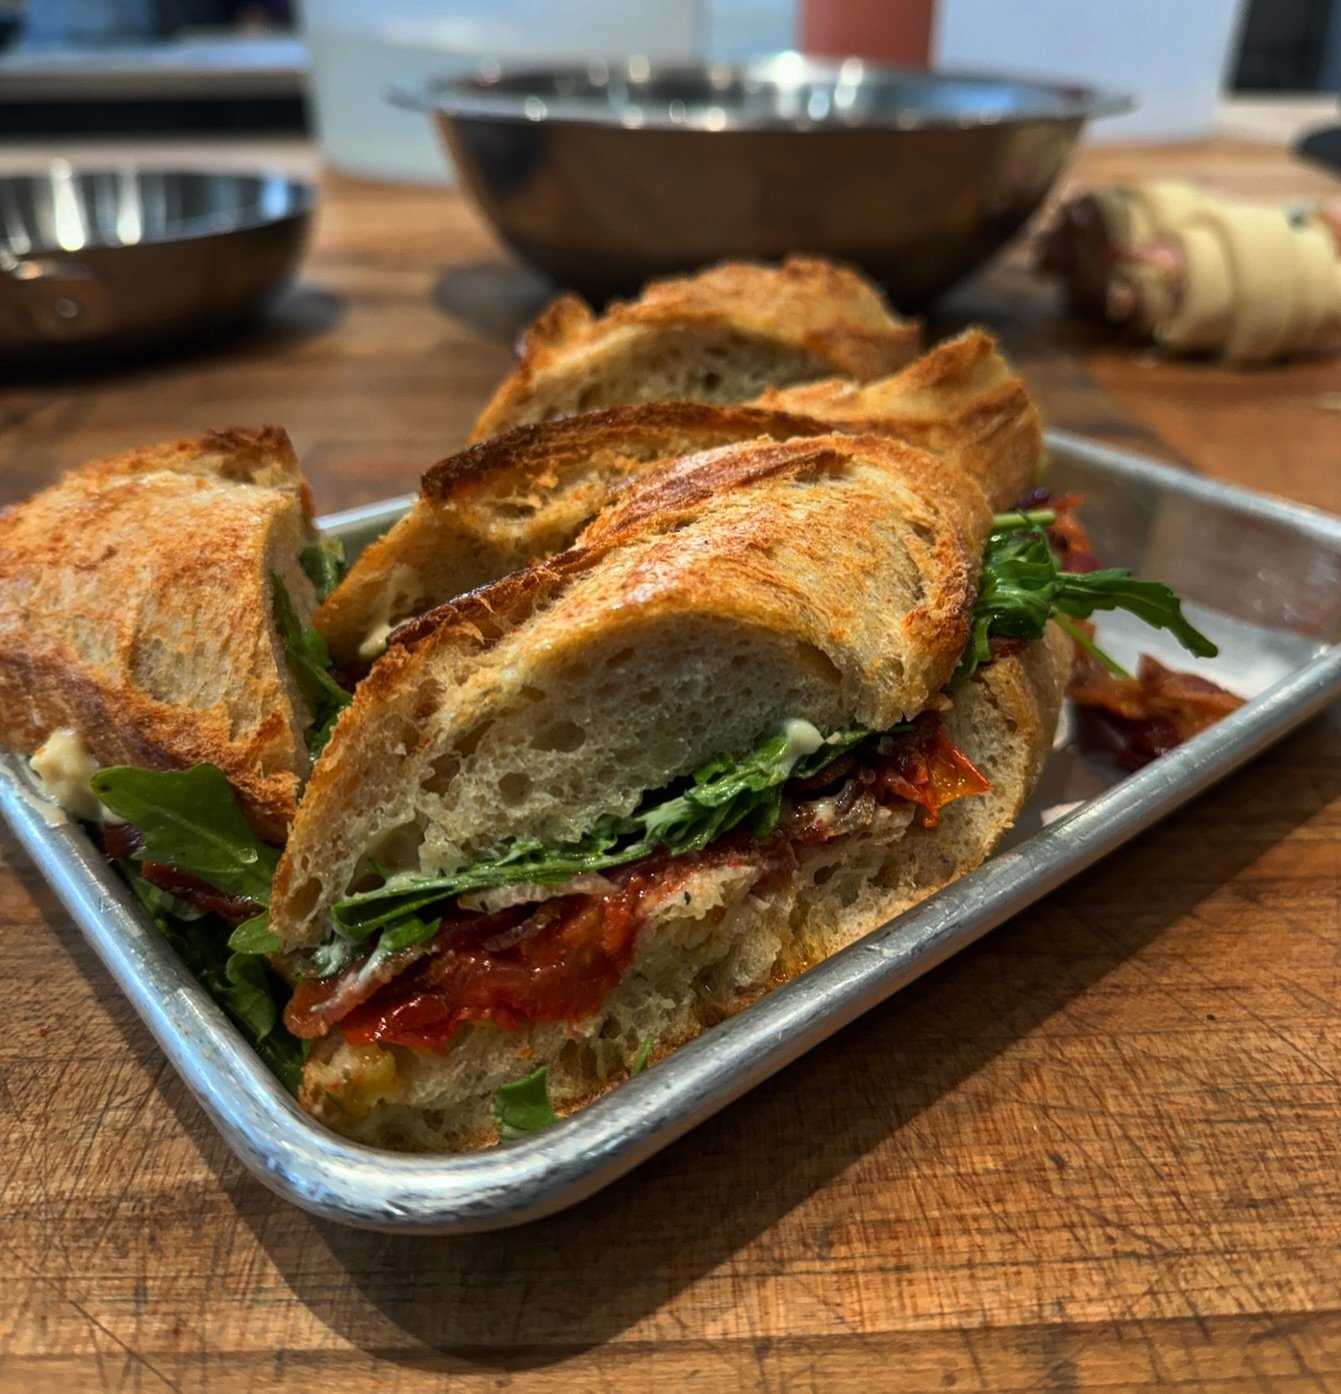 &lsquo;BLT&rsquo;s&rsquo; this week! Thyme roasted cherry tomatoes, Berkshire bacon, arugula, and roasted garlic &amp; lemon mayo on our fresh baguette.